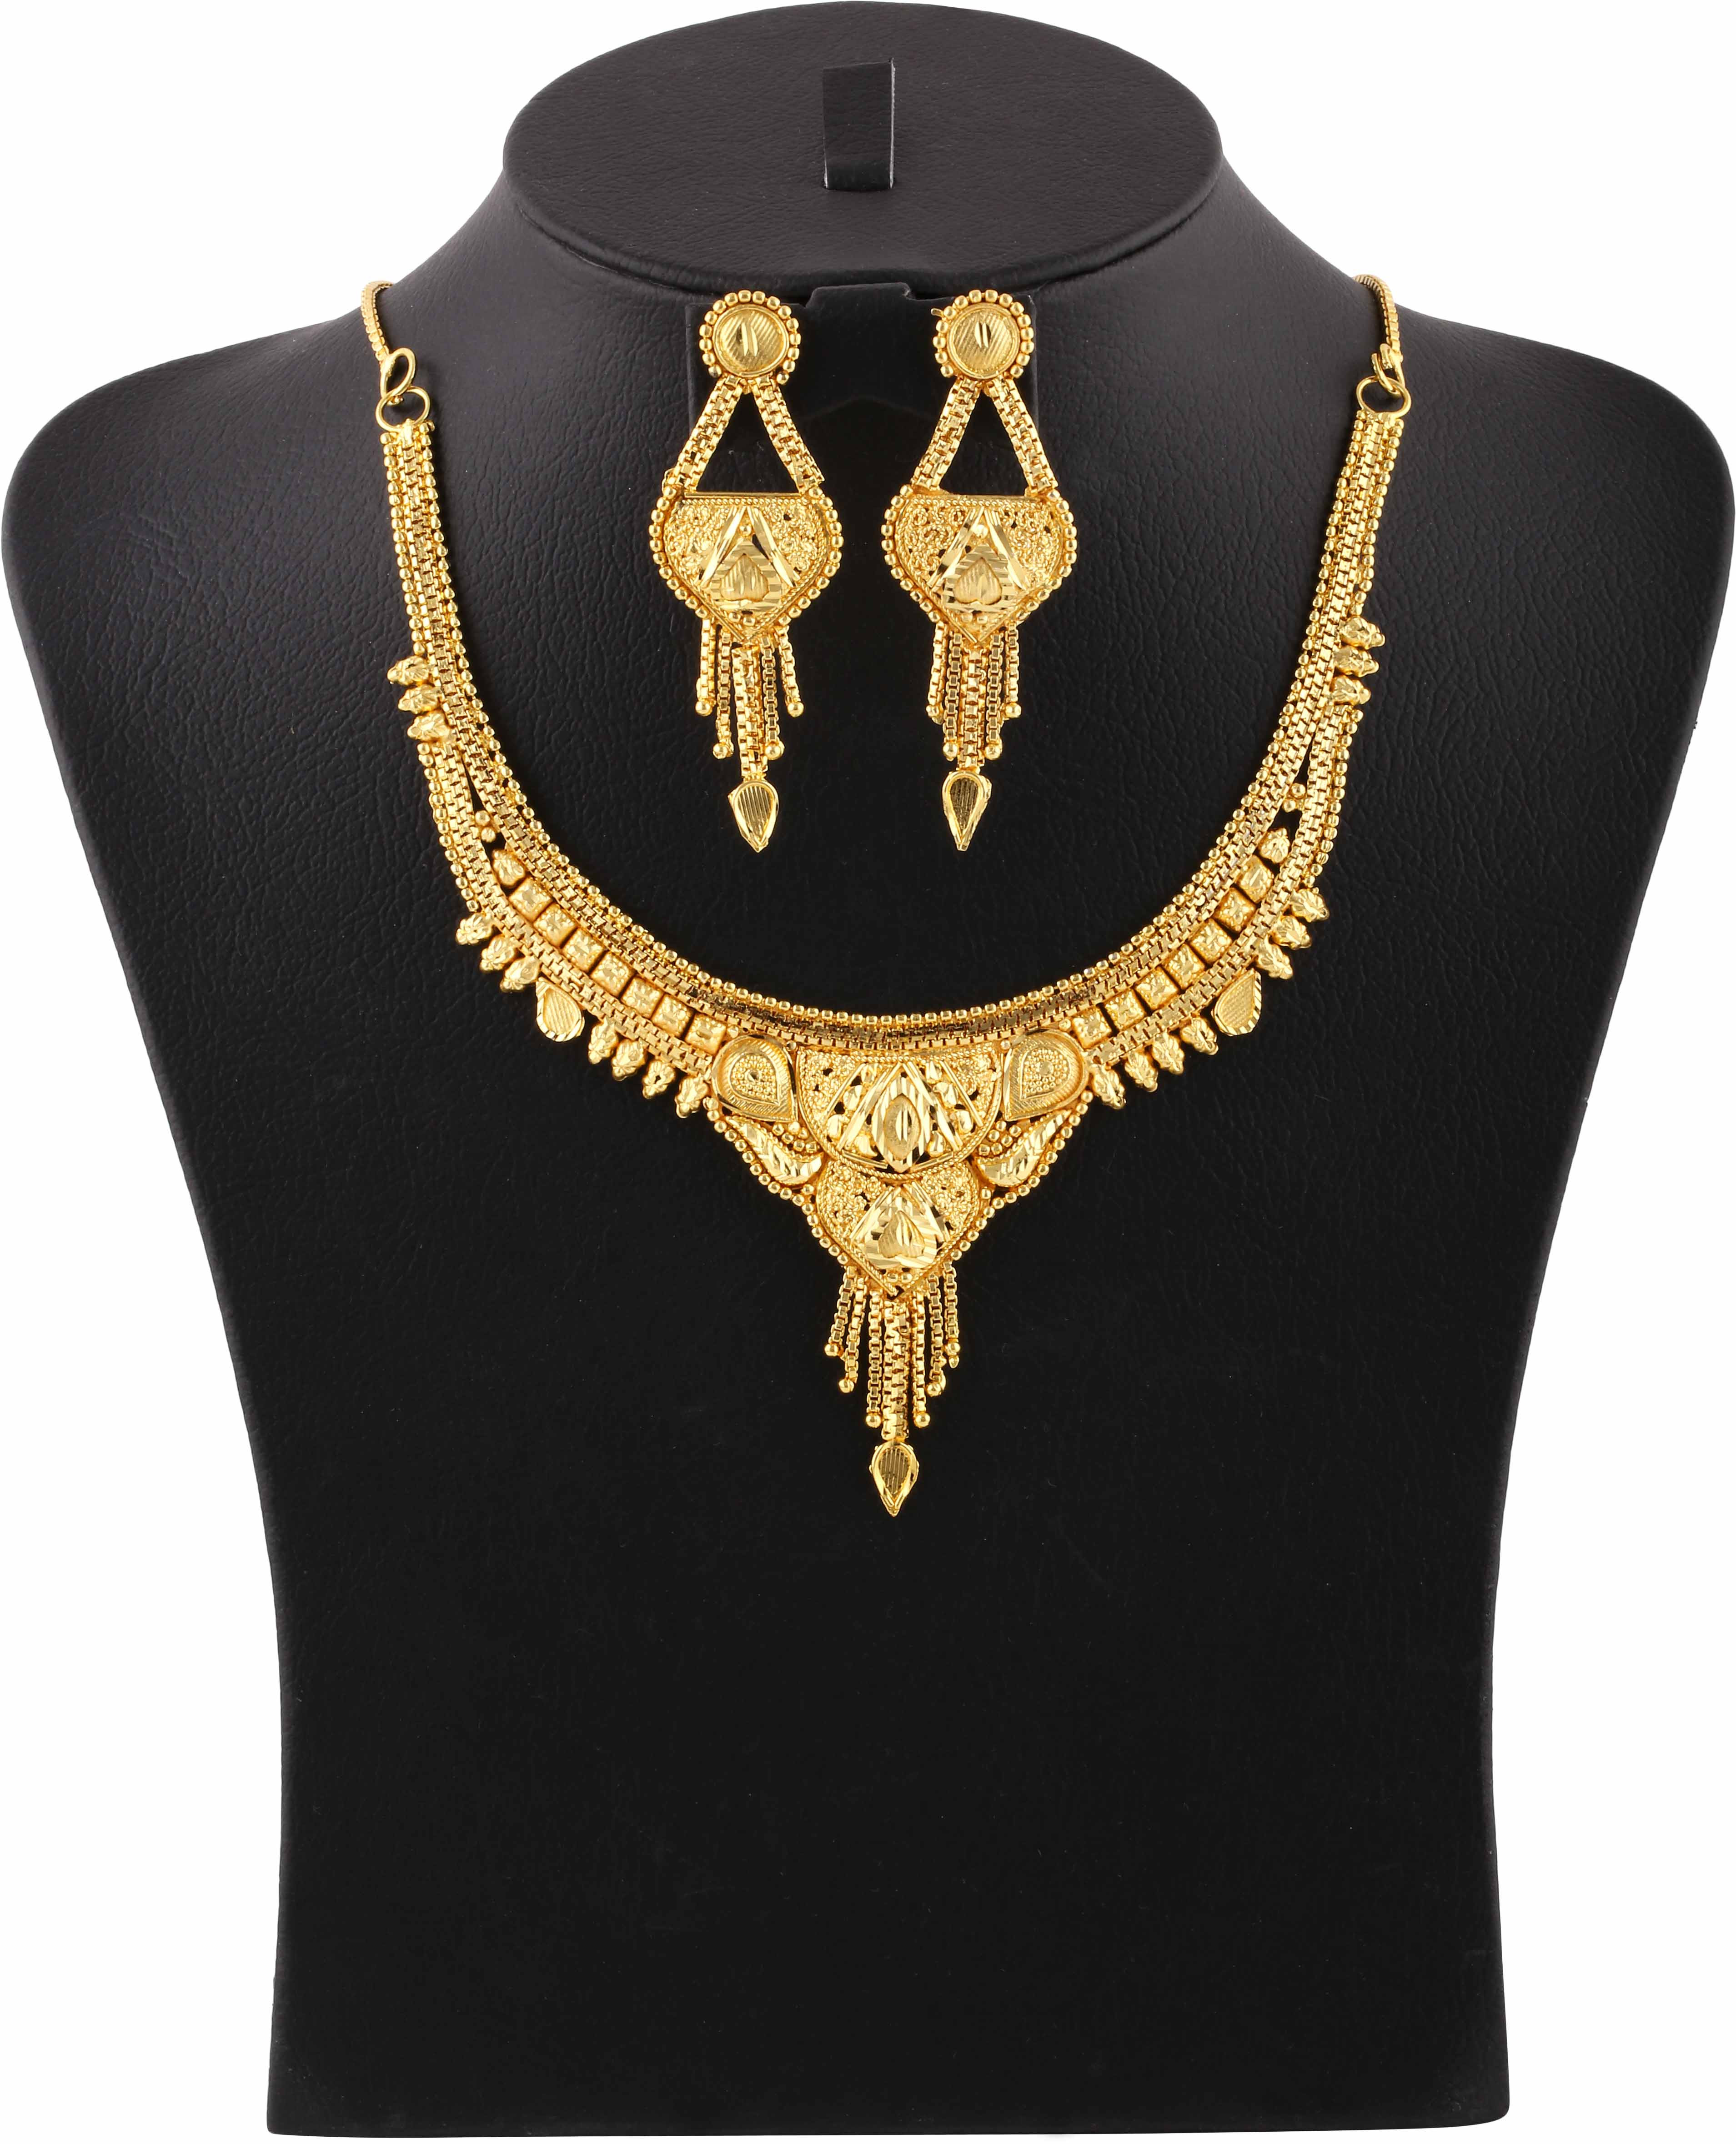 Buy Milano 18K Gold Plated Necklace with Earrings Set ...